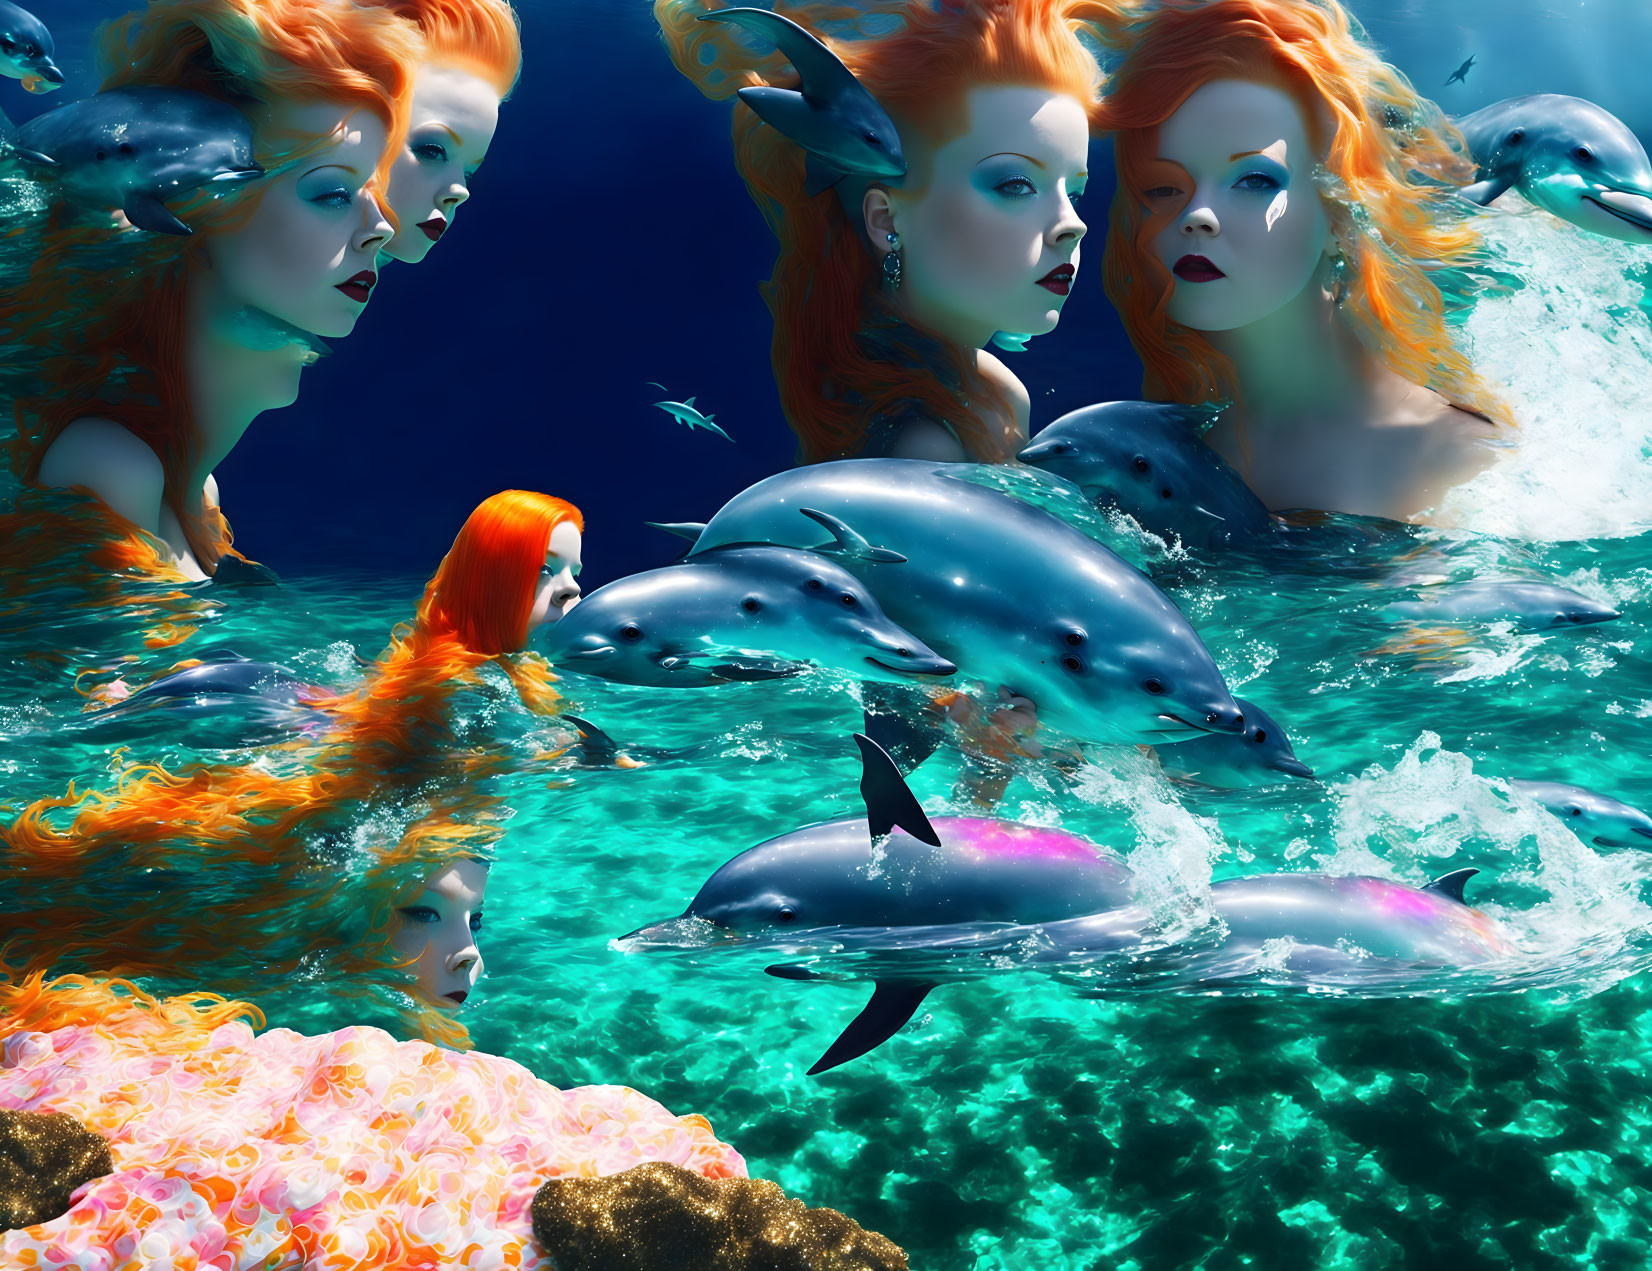 Colorful Underwater Scene: Red-Haired Mermaids, Dolphins, and Coral Reef